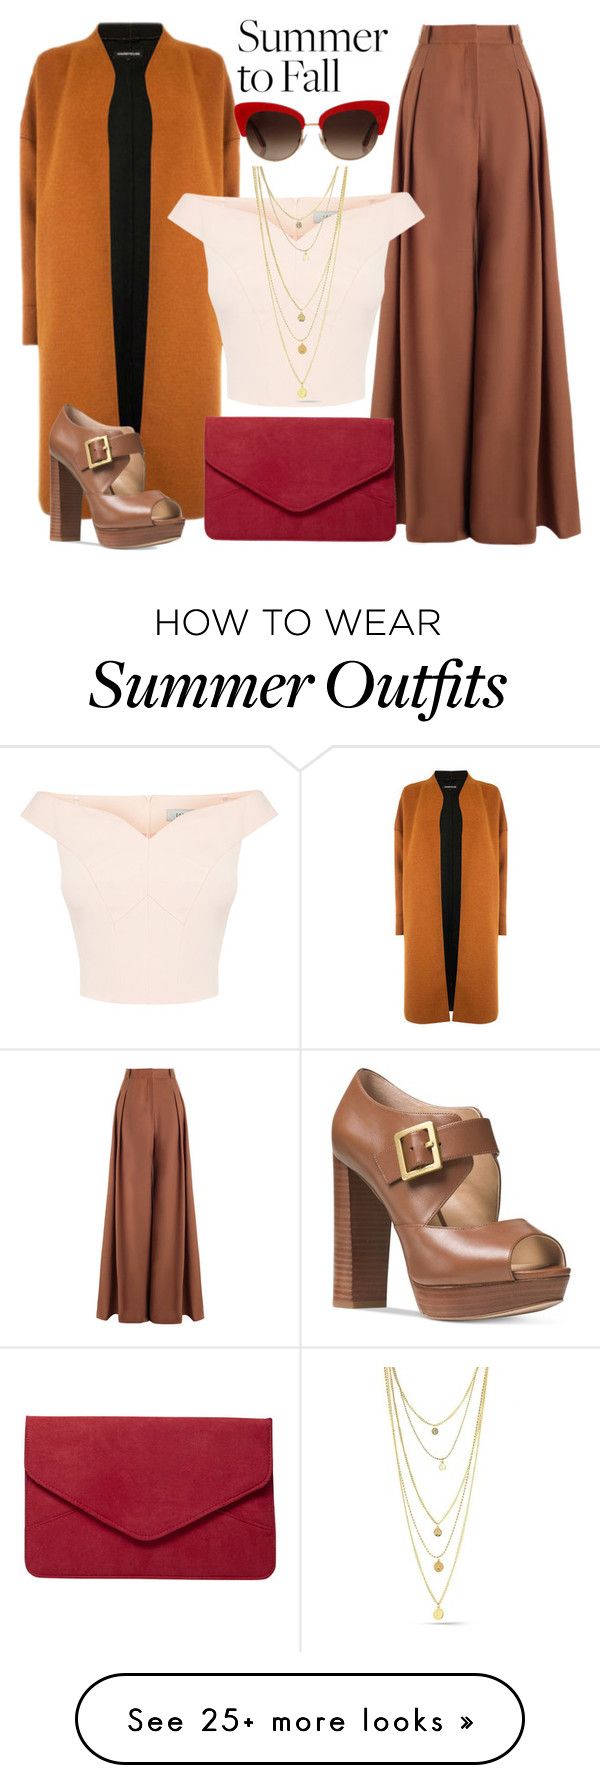 "fall outfit" by tyttaya on Polyvore featuring Zimmermann, Warehouse, ...